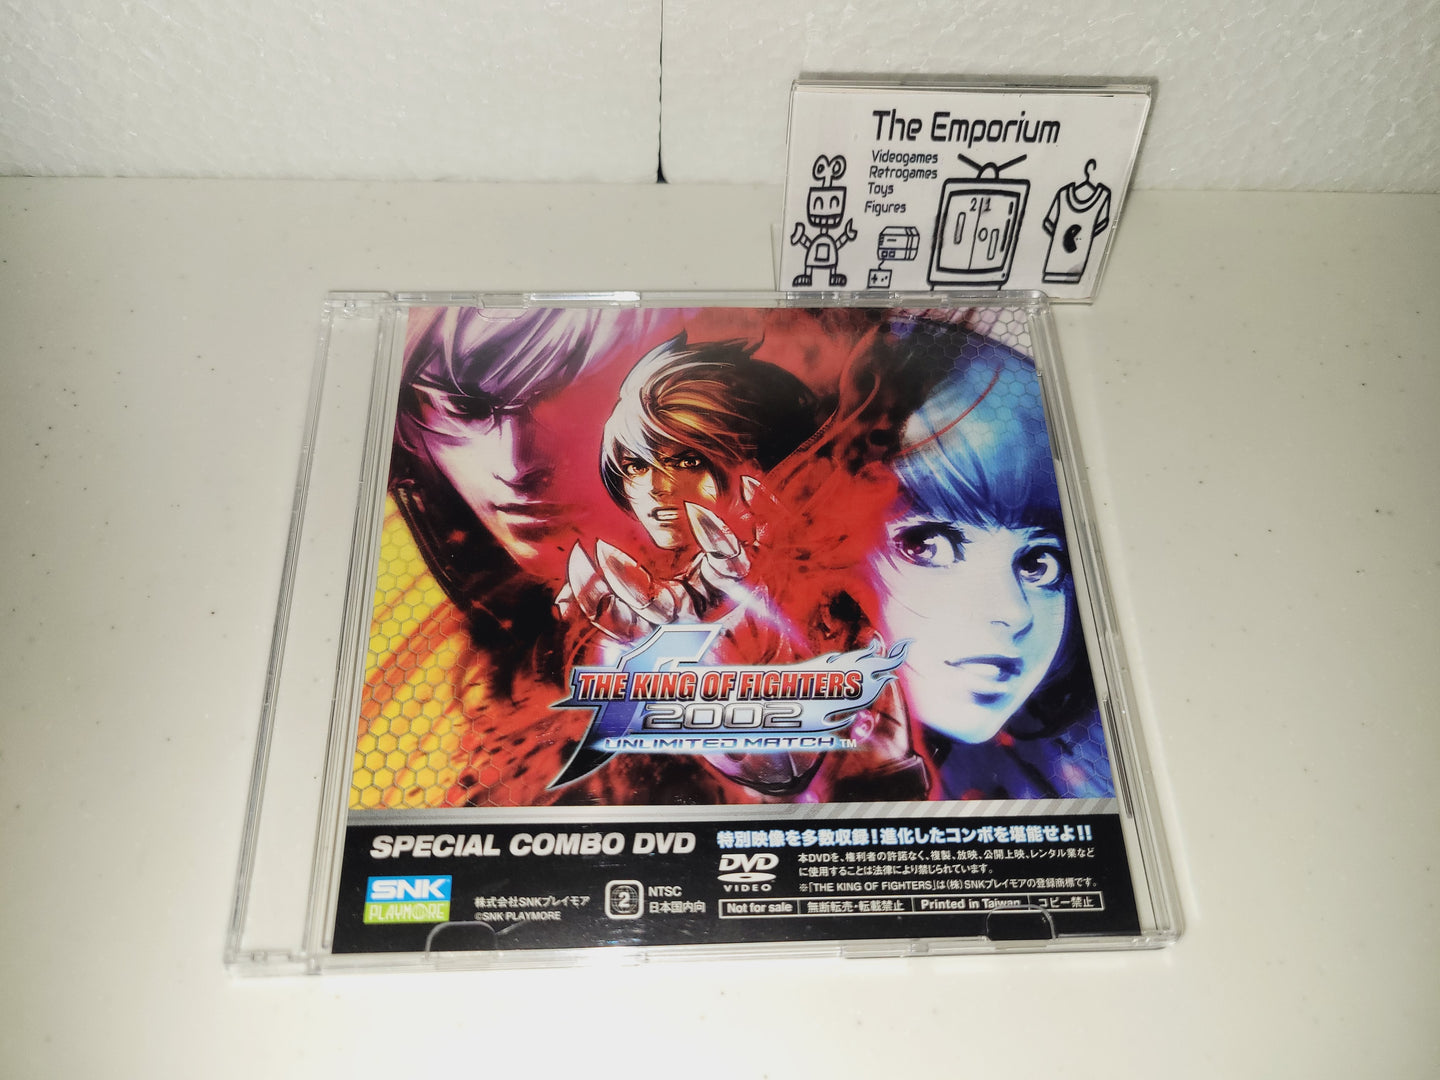 The King of Fighters 2002um Special Combo Video - Kof2002um ps2 bonus dvd - Sony playstation 2